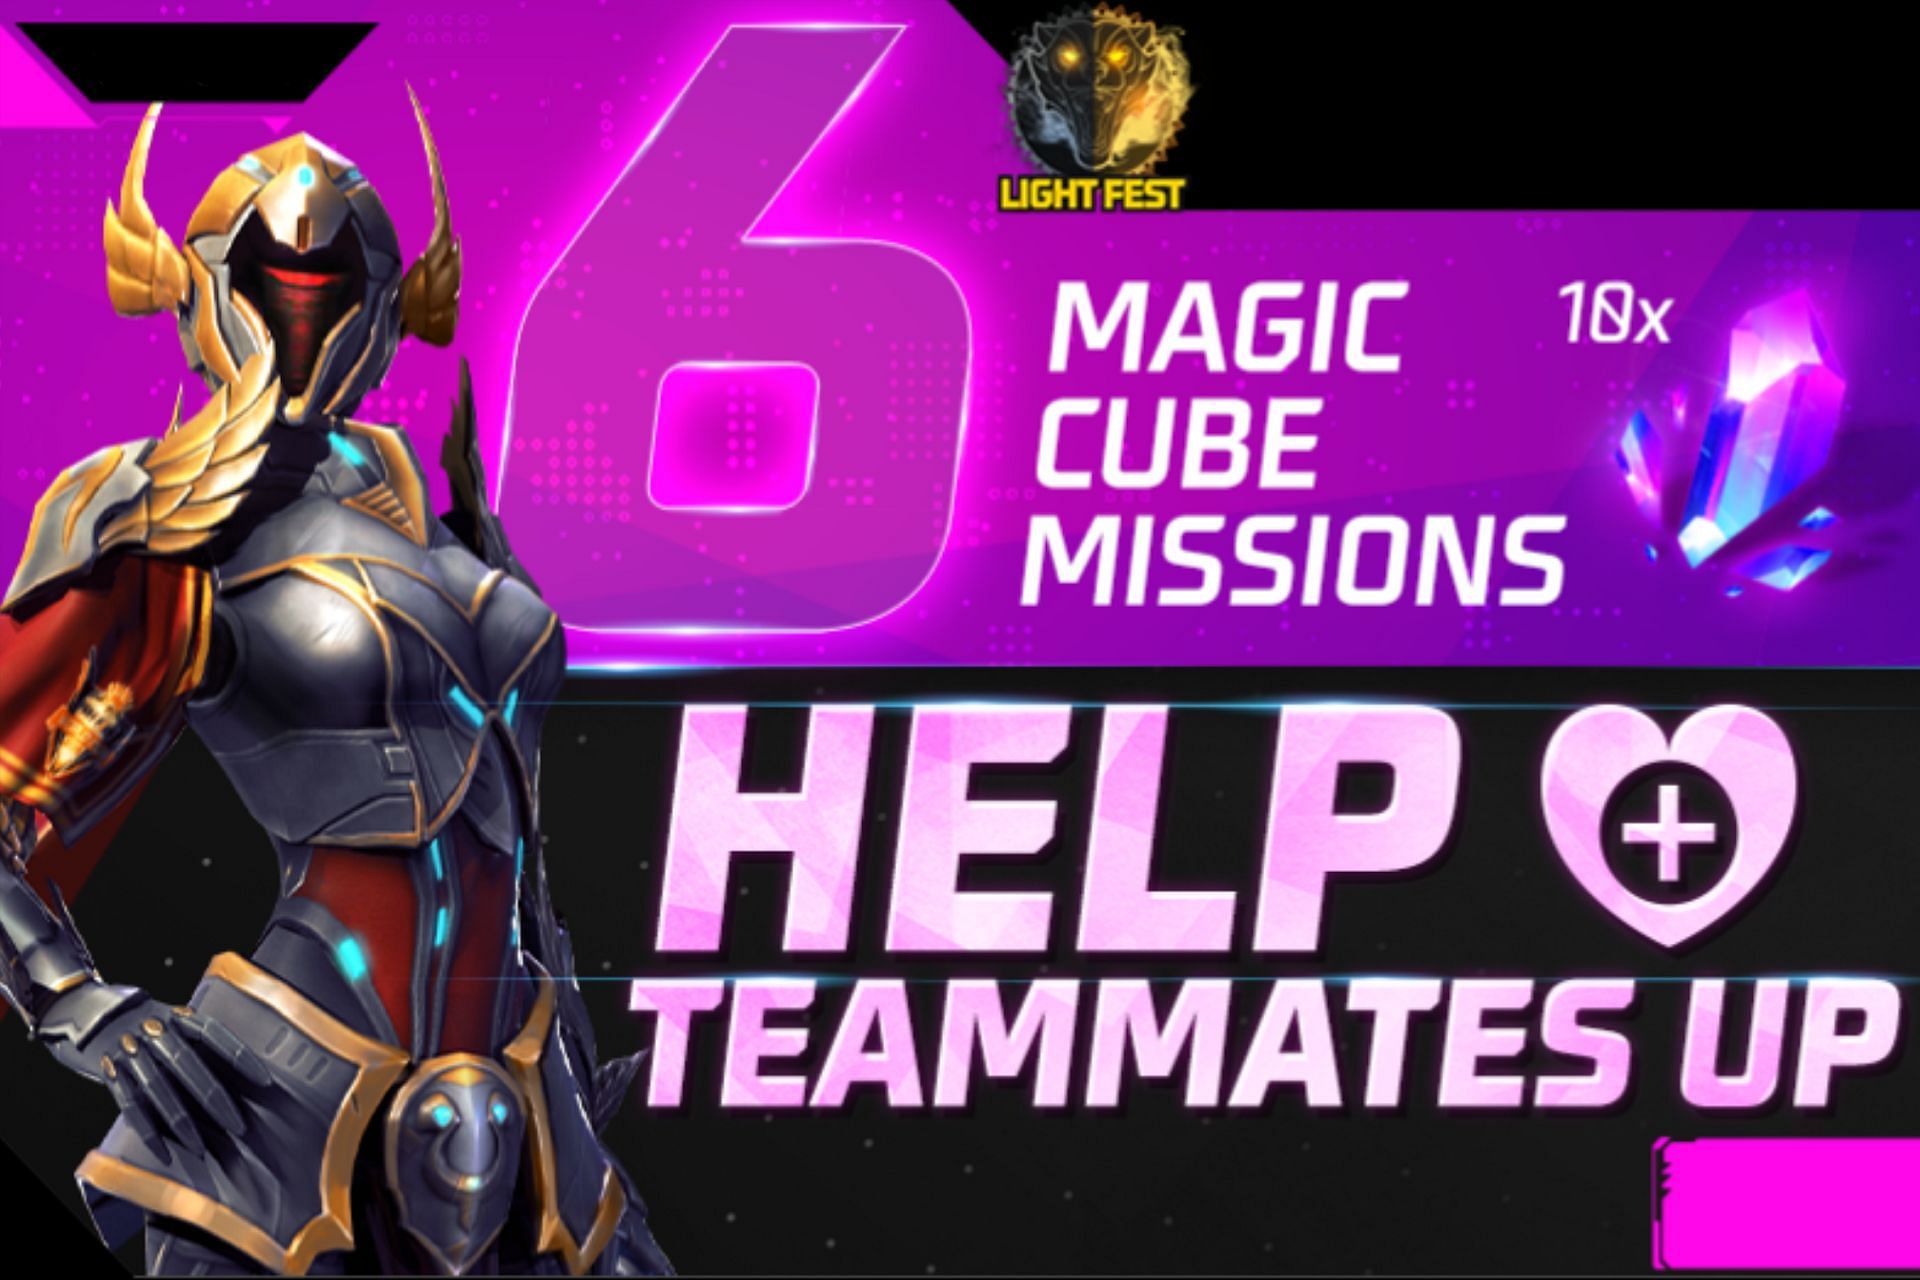 The sixth mission requires players to help teammates up (Image via Sportskeeda)